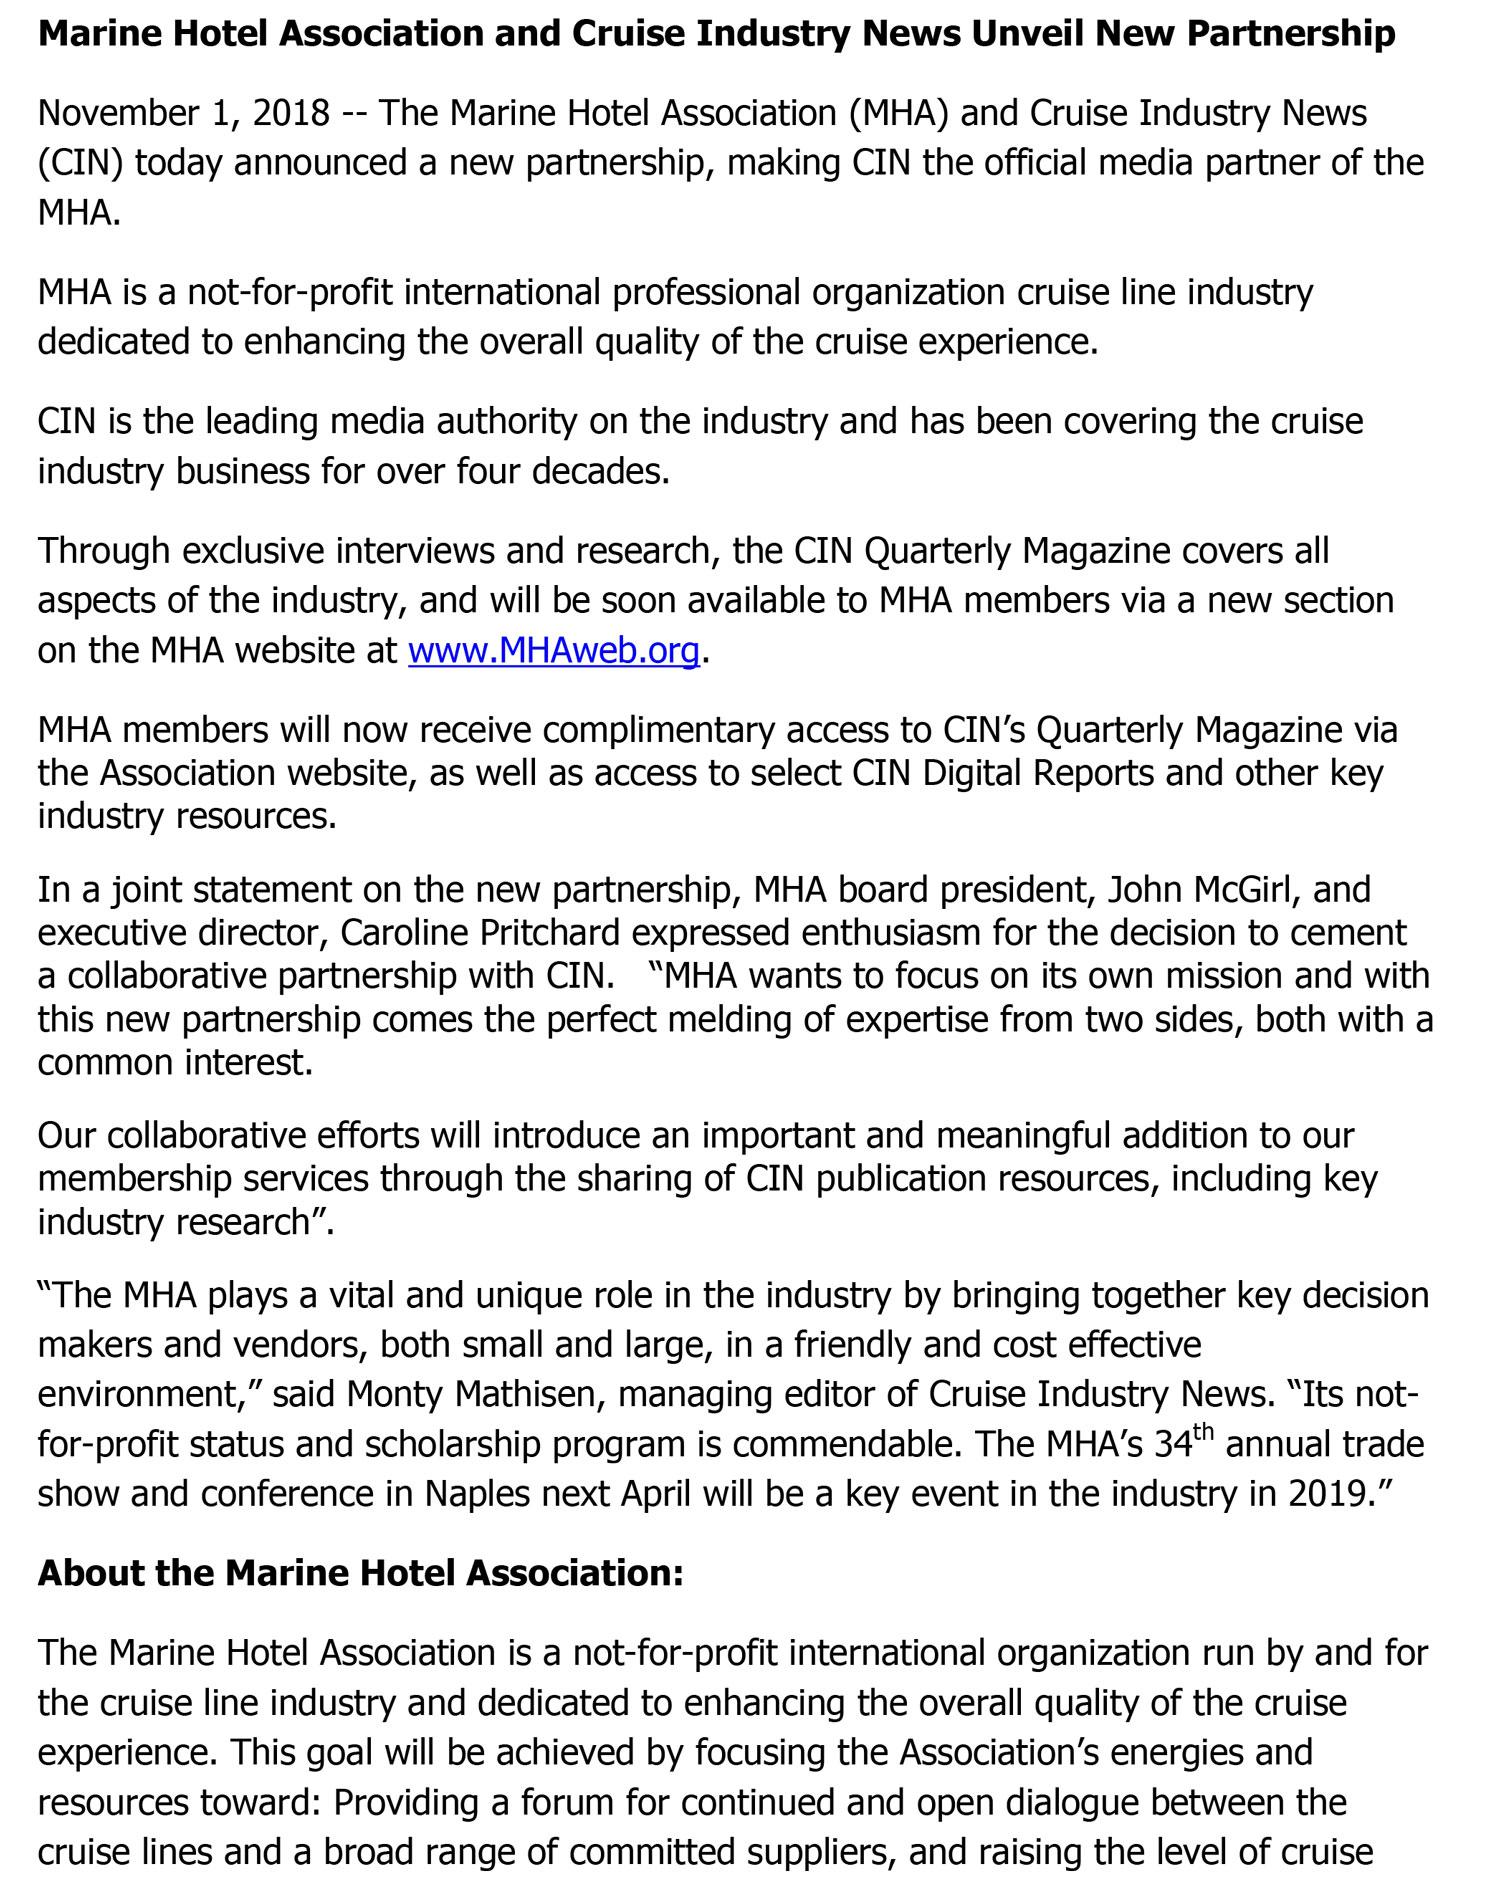 MHA Announces New Collaborative Partnership with Cruise Industry News